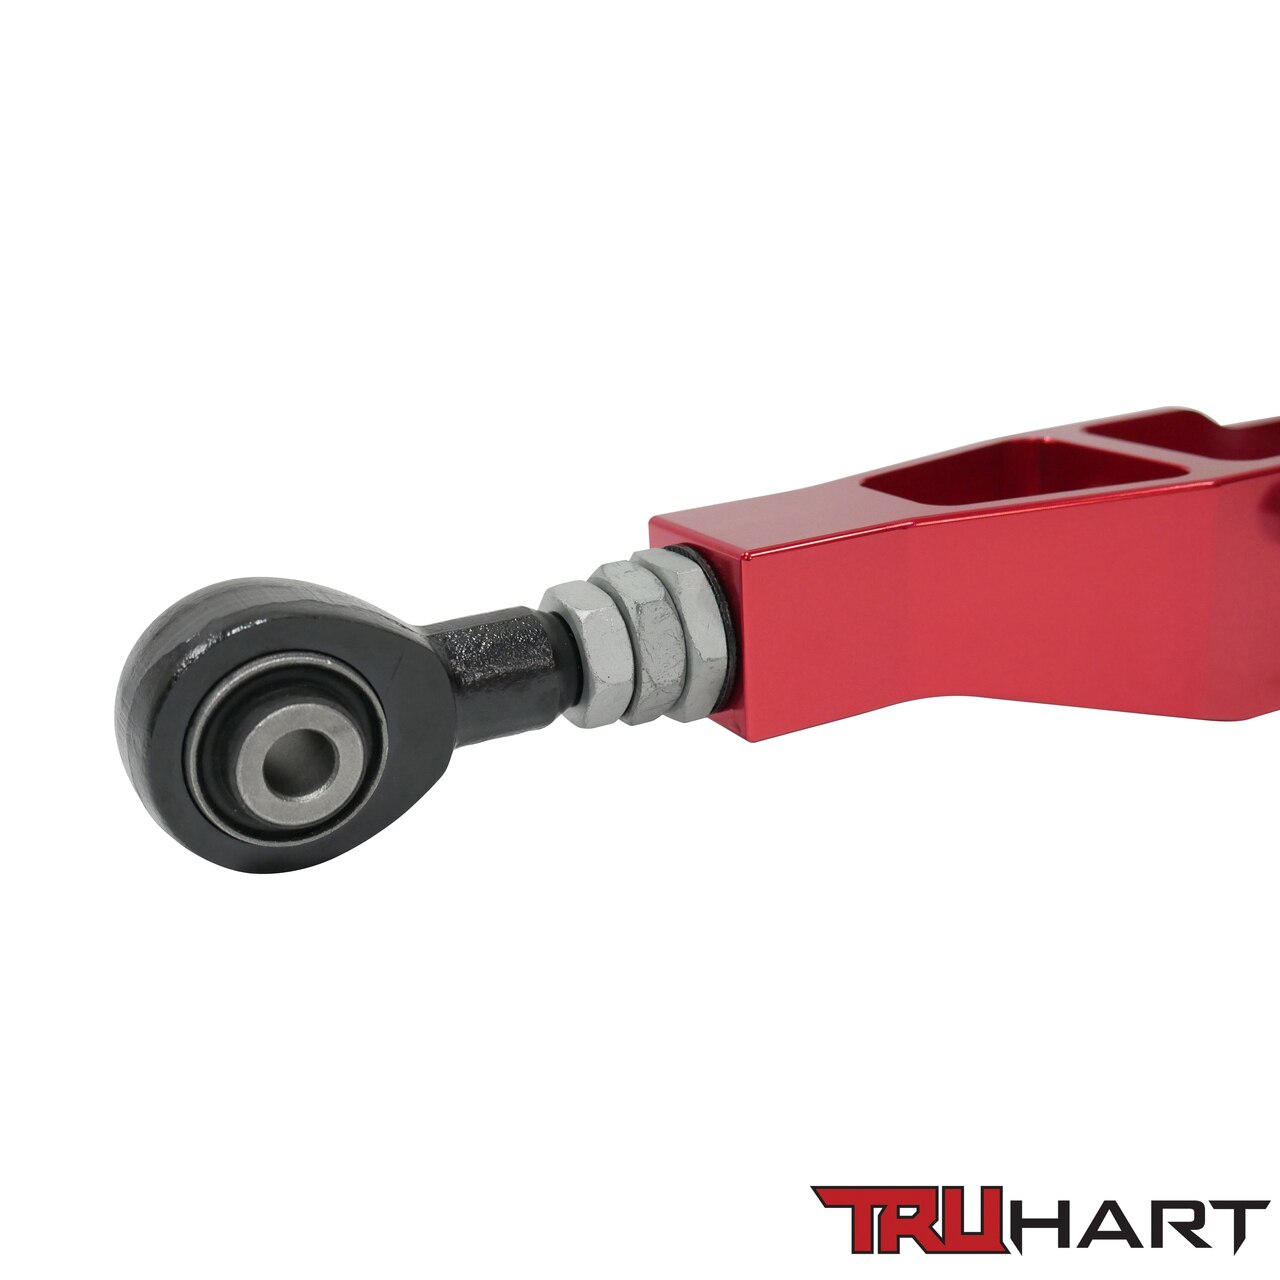 TruHart - Rear Lower Control Arms - Adjustable - Anodized Red - TH-S108-RE